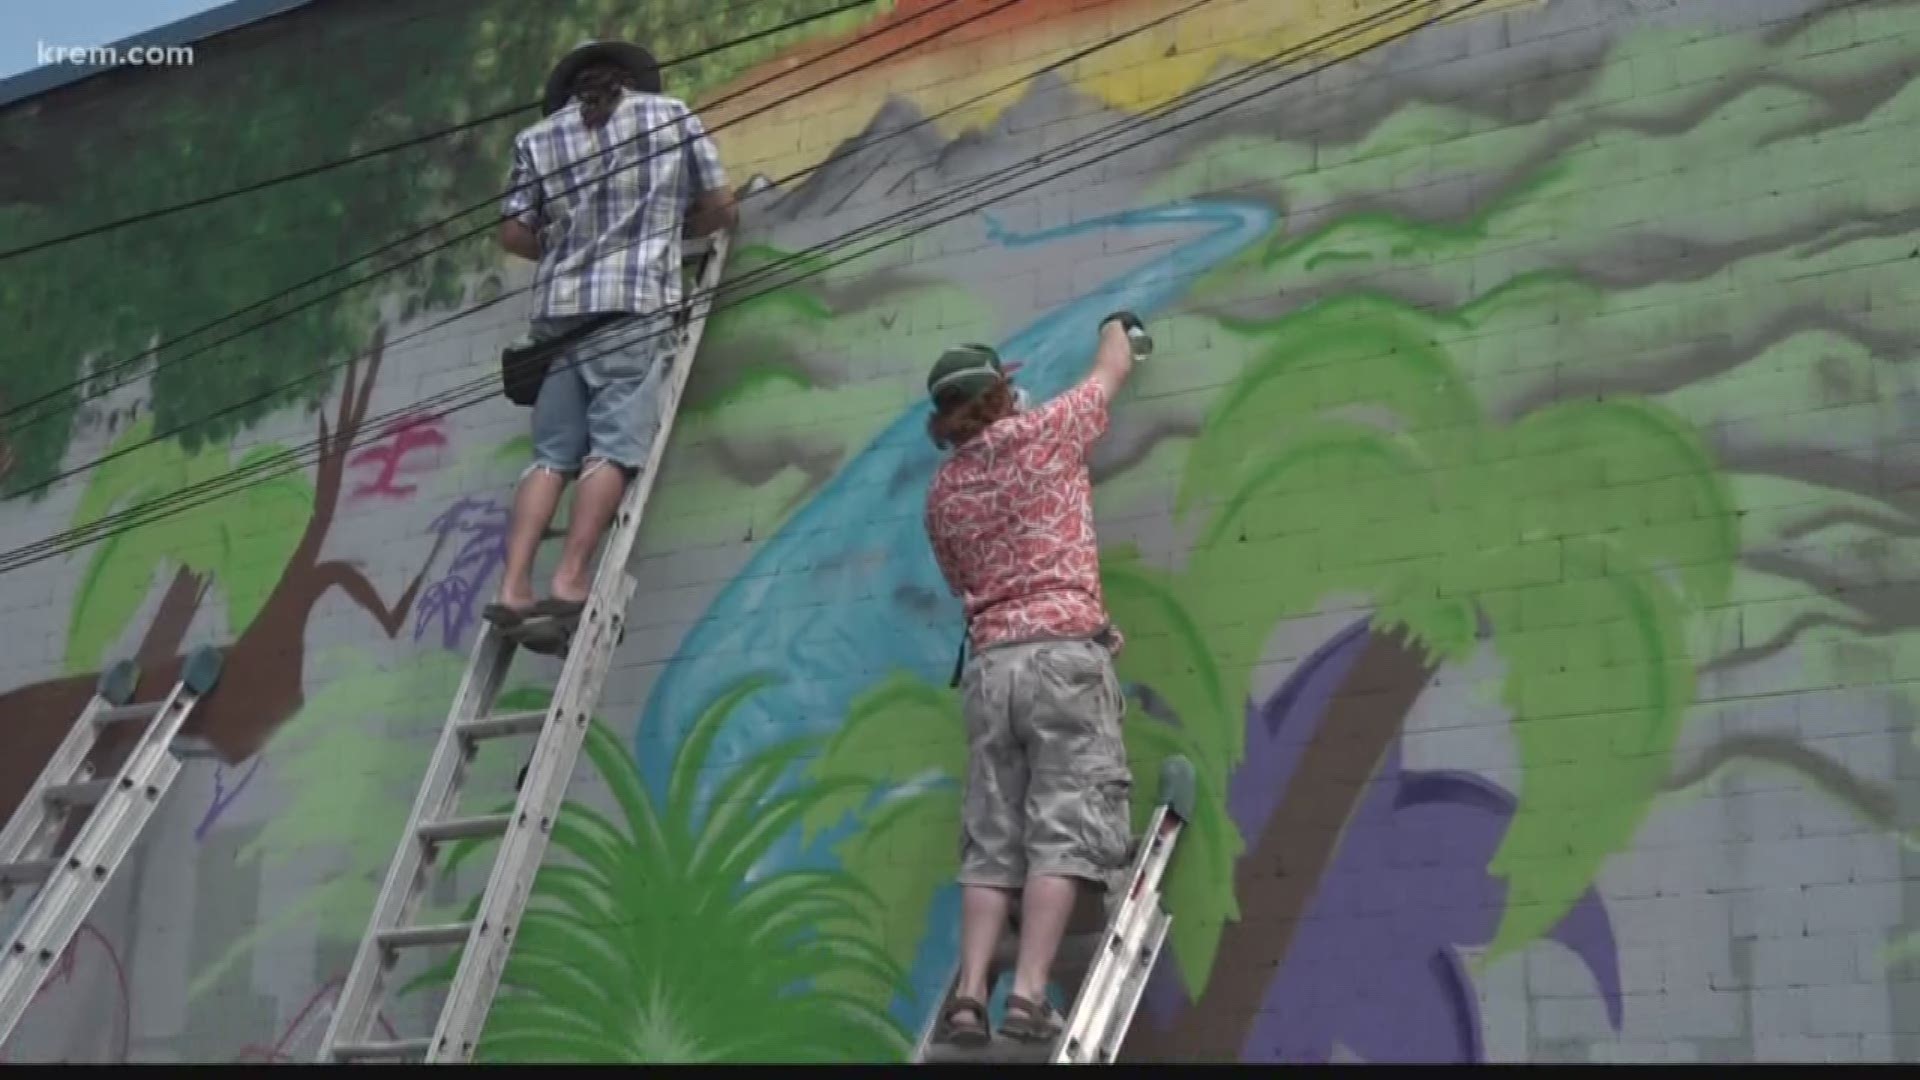 Spokane artists decorate  Garland District alley with murals